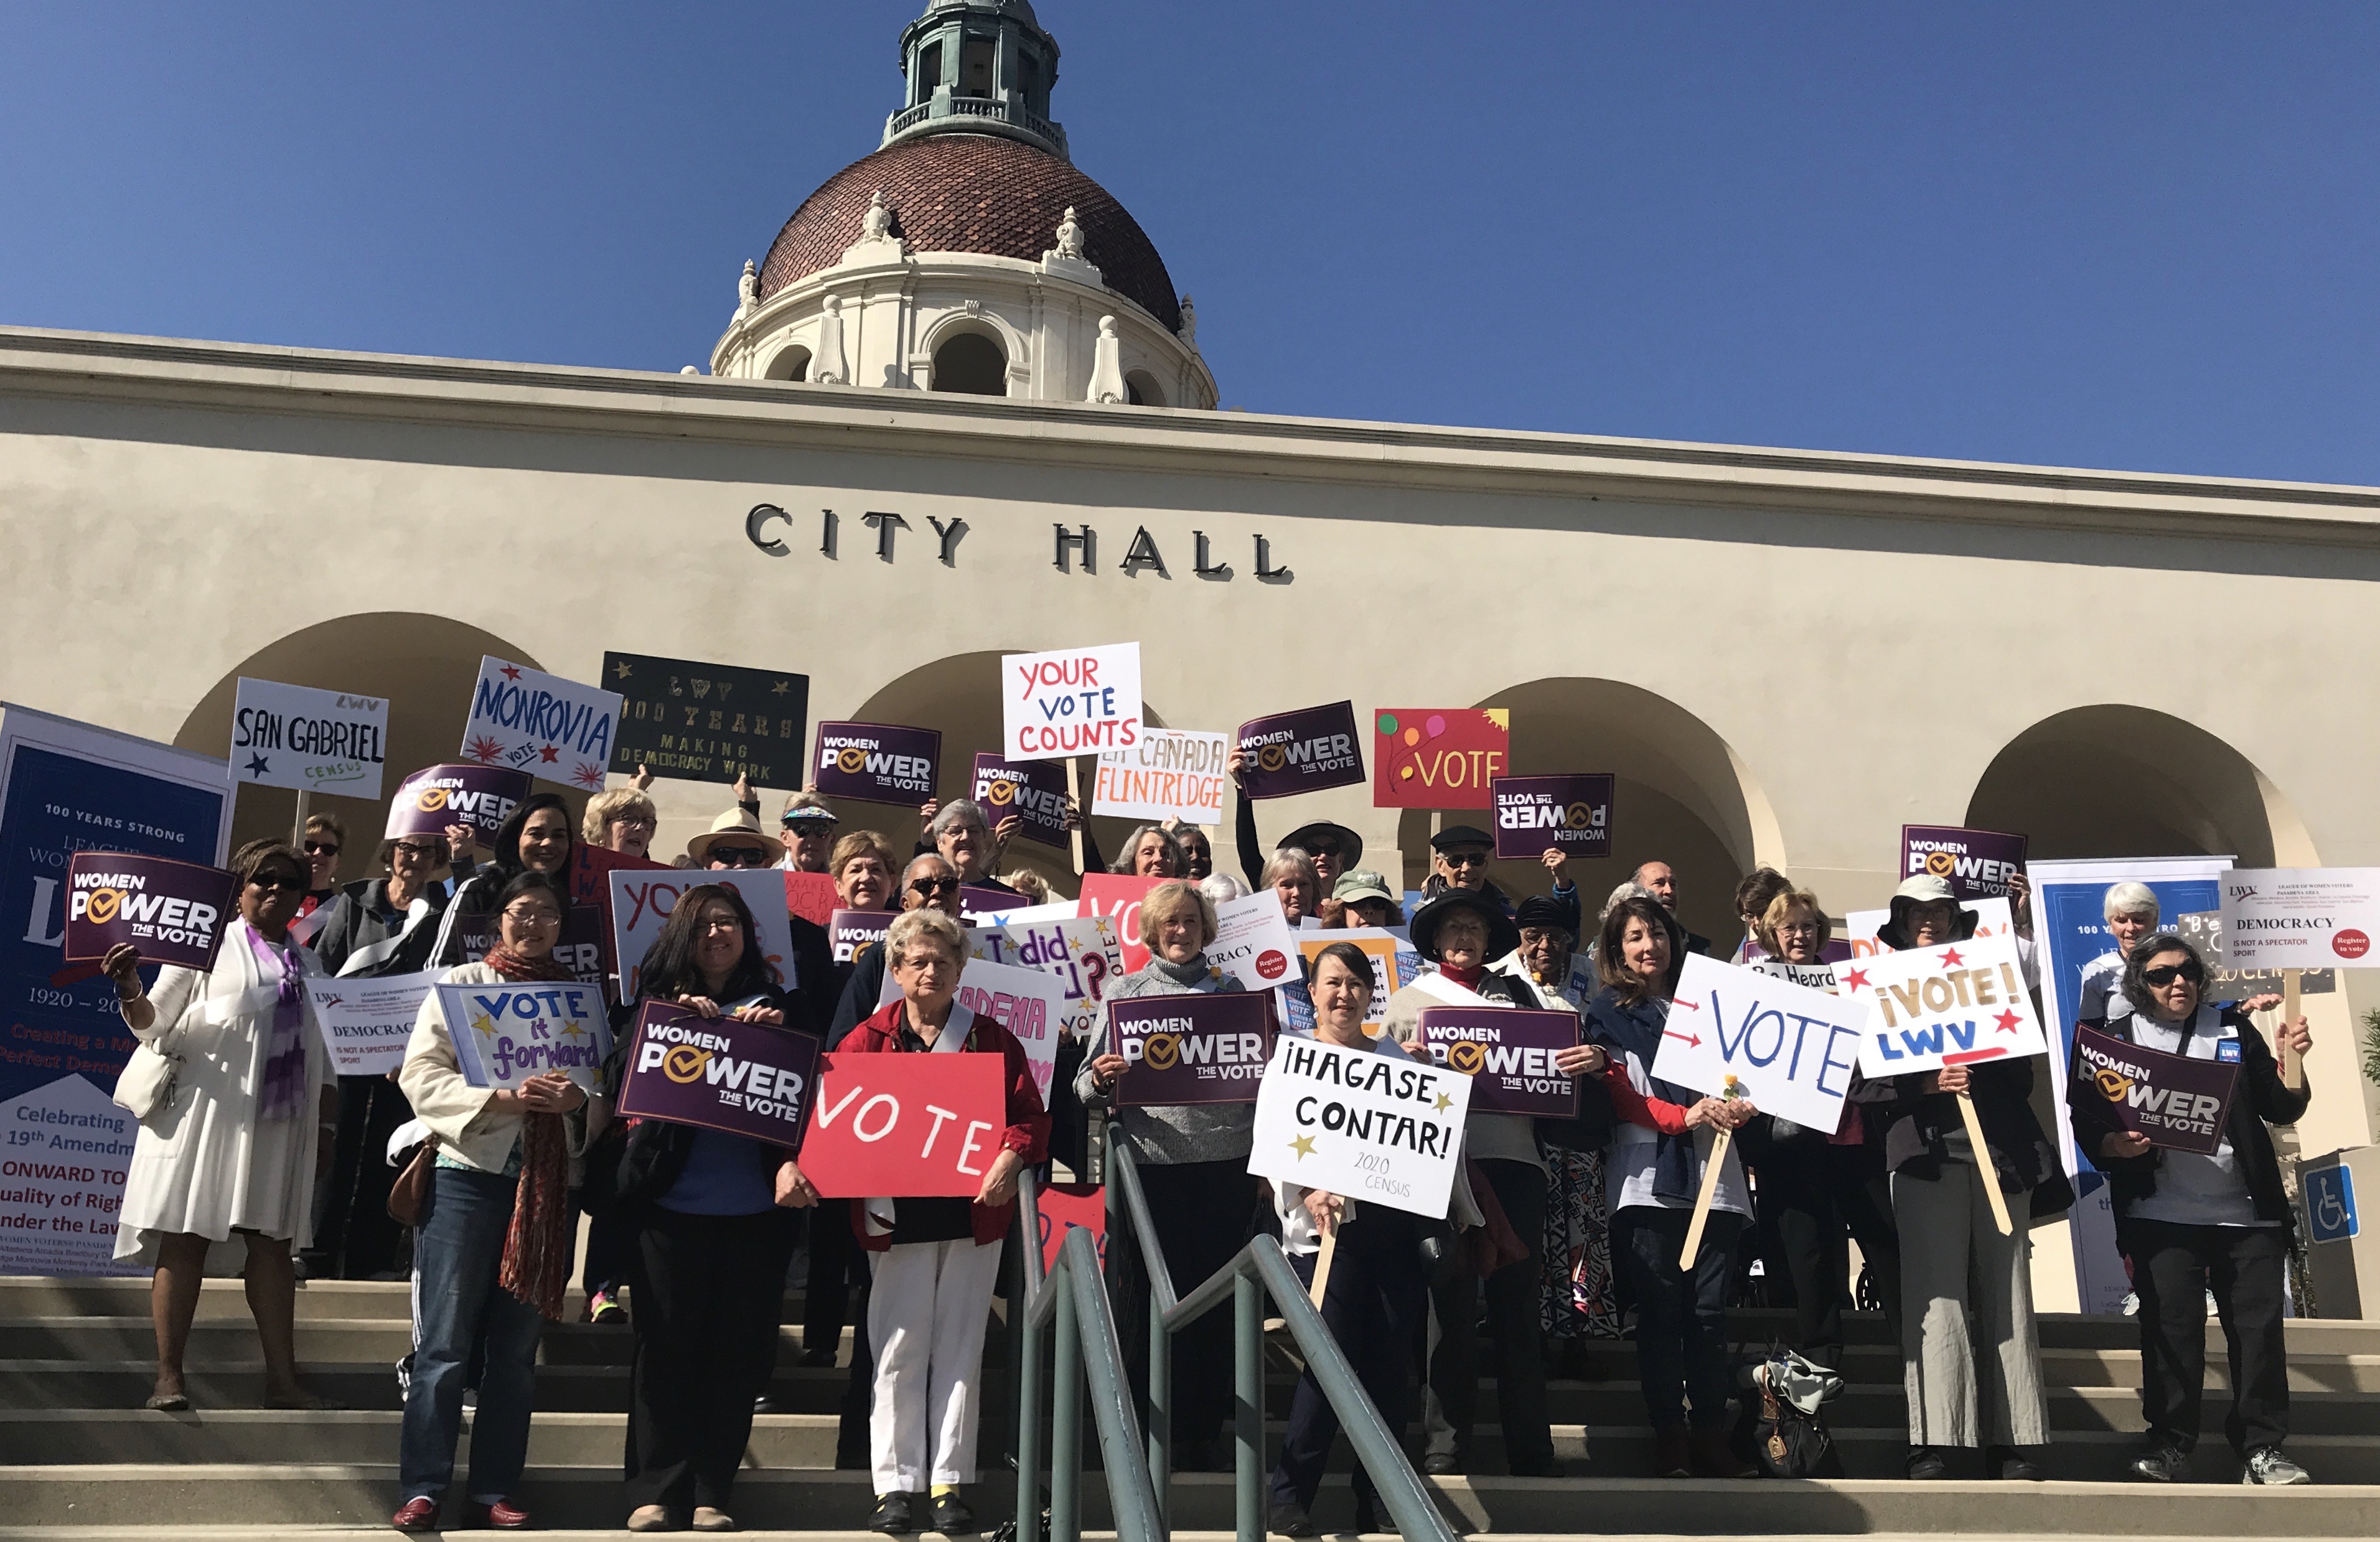 February League Day at City Hall